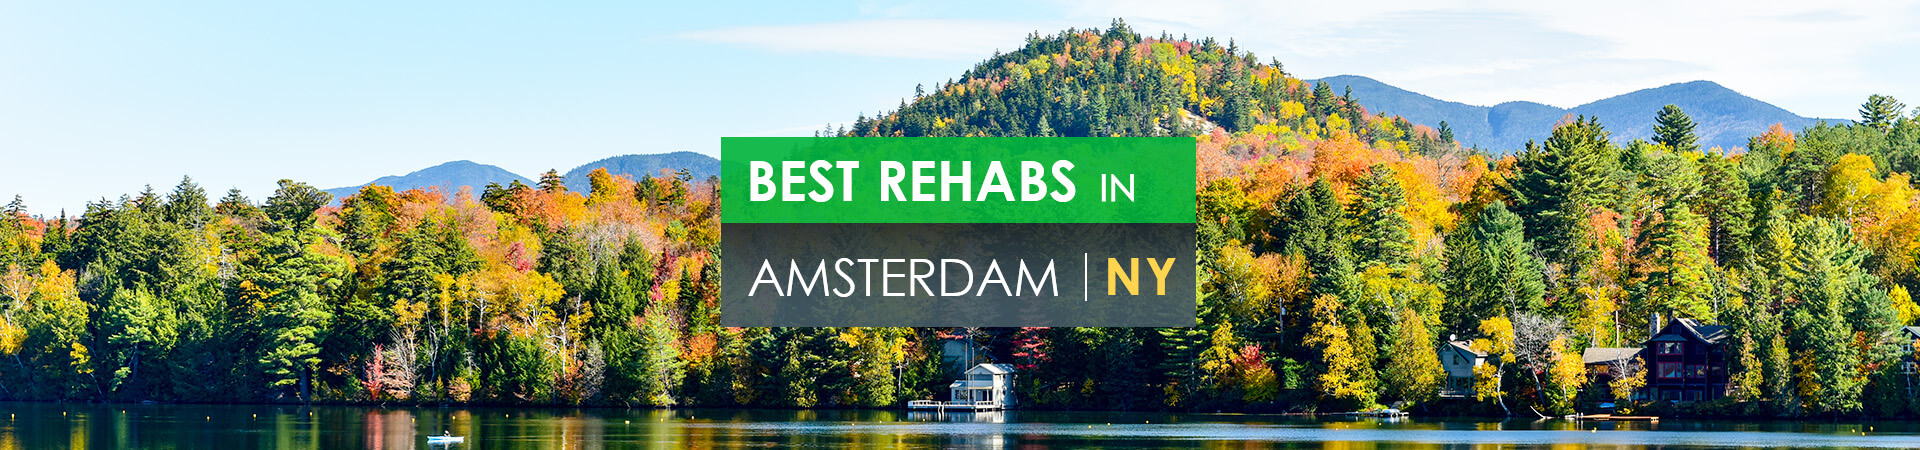 Best rehabs in Amsterdam, NY